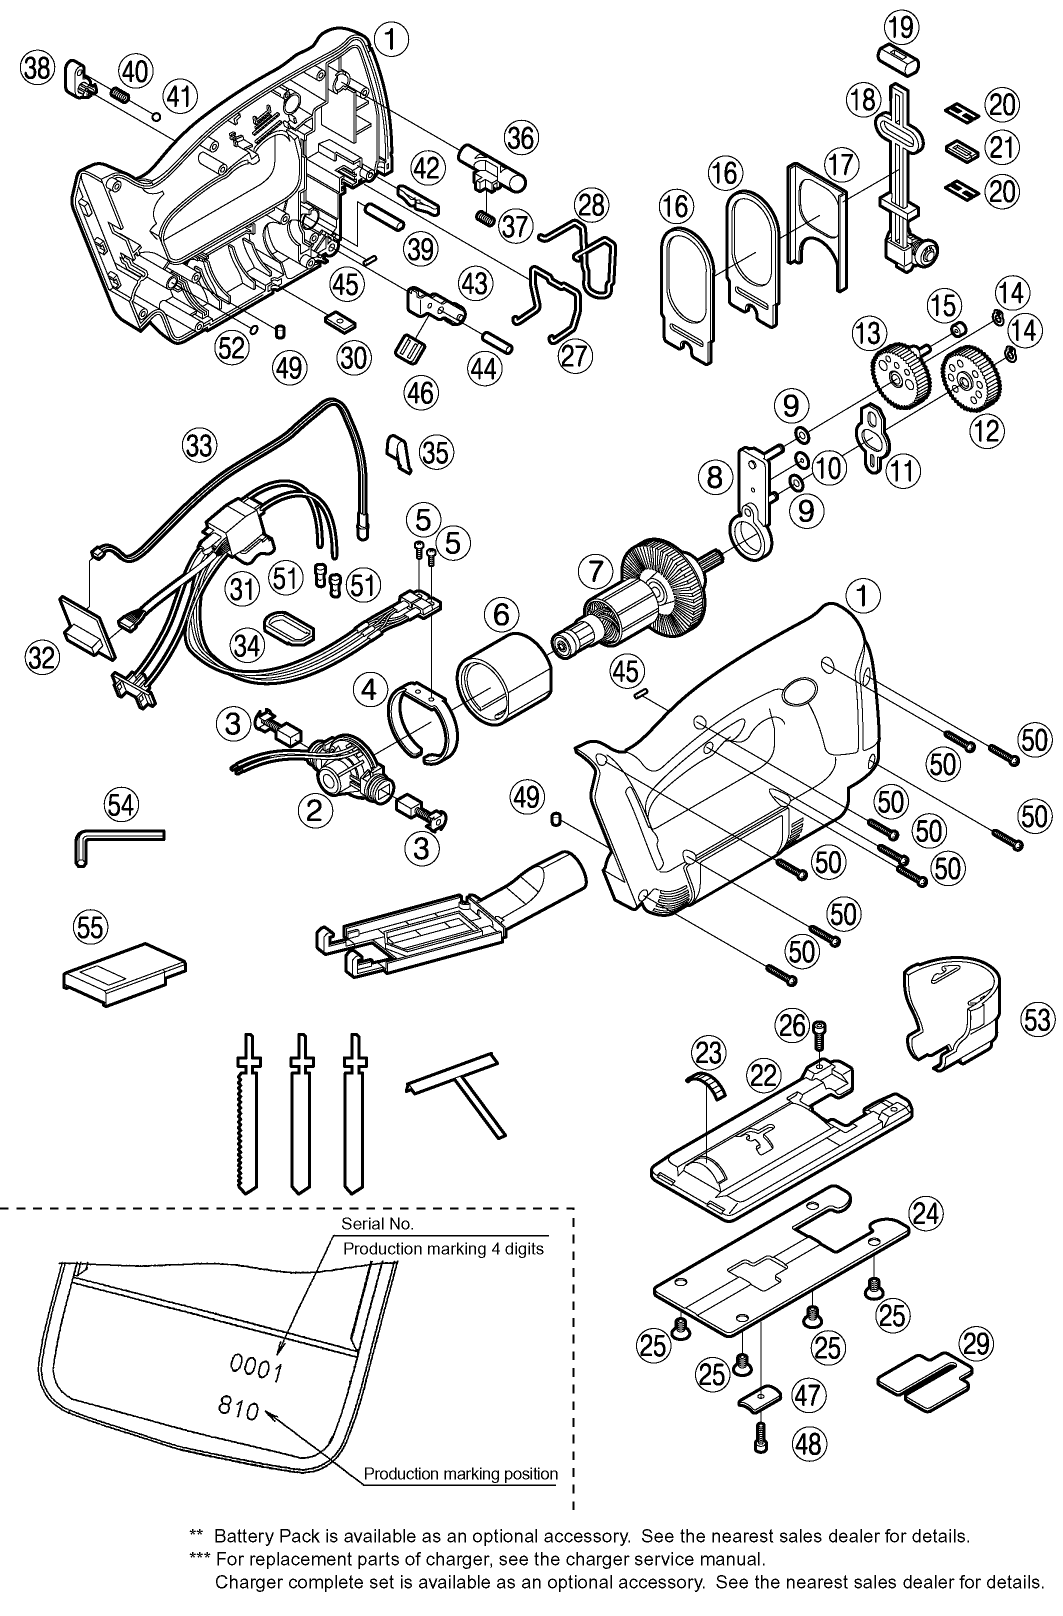 EY4541: Exploded View